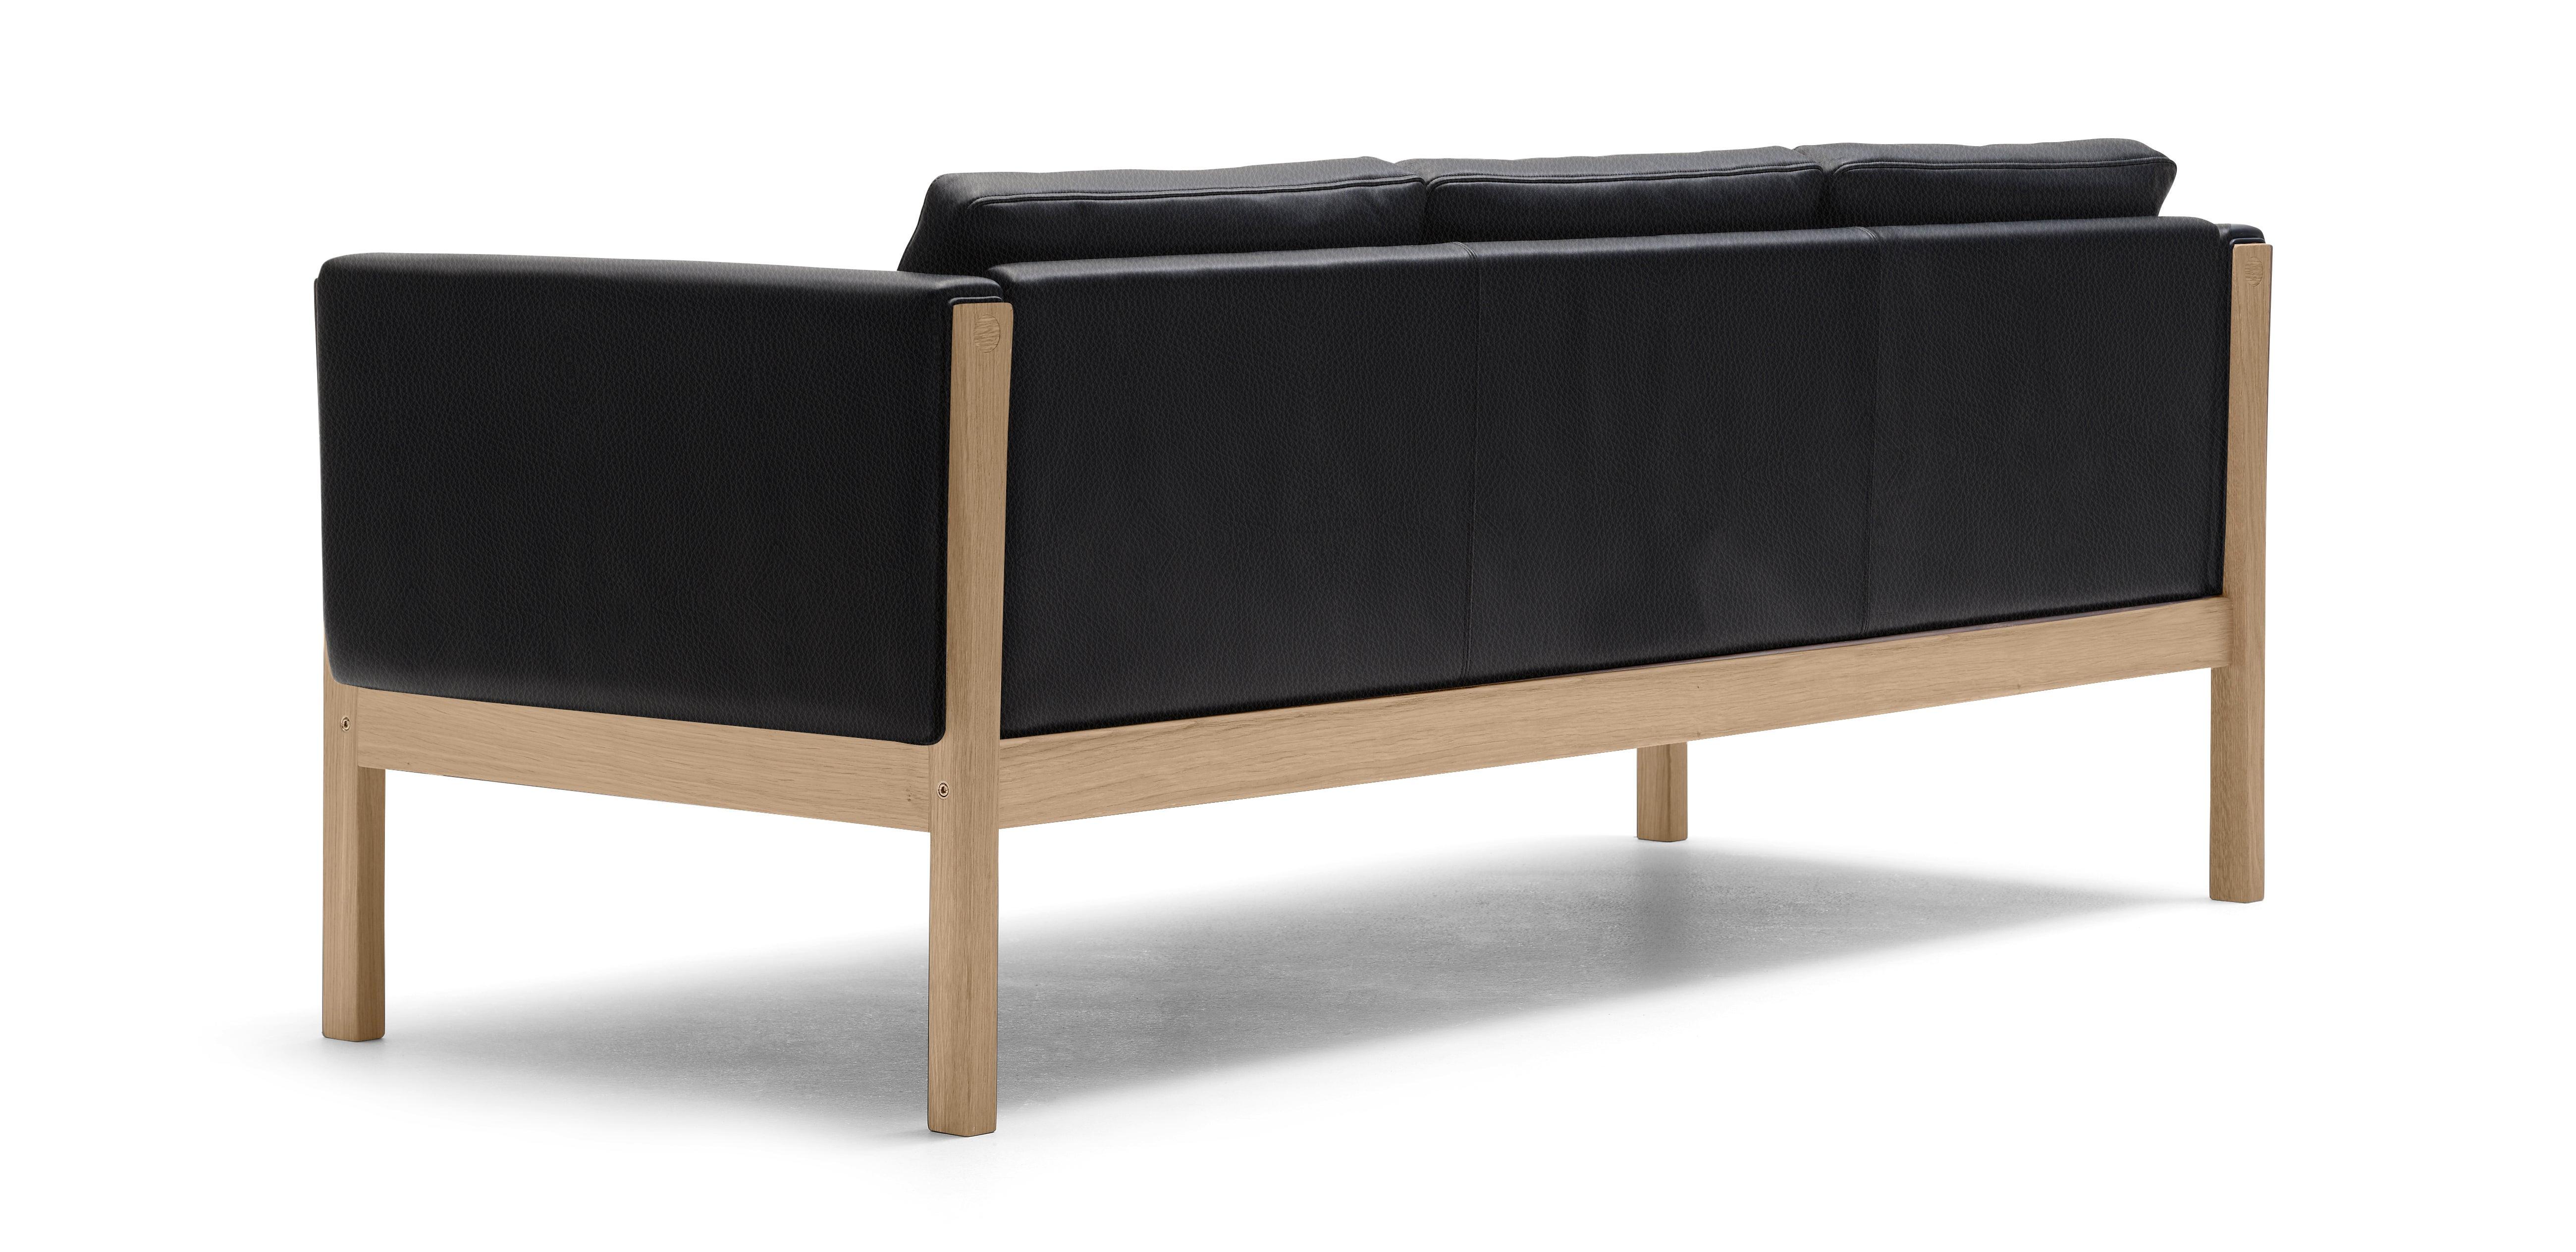 Modern CH163 Sofa in Oiled Oak Frame with Leather Upholstery by Hans J. Wegner